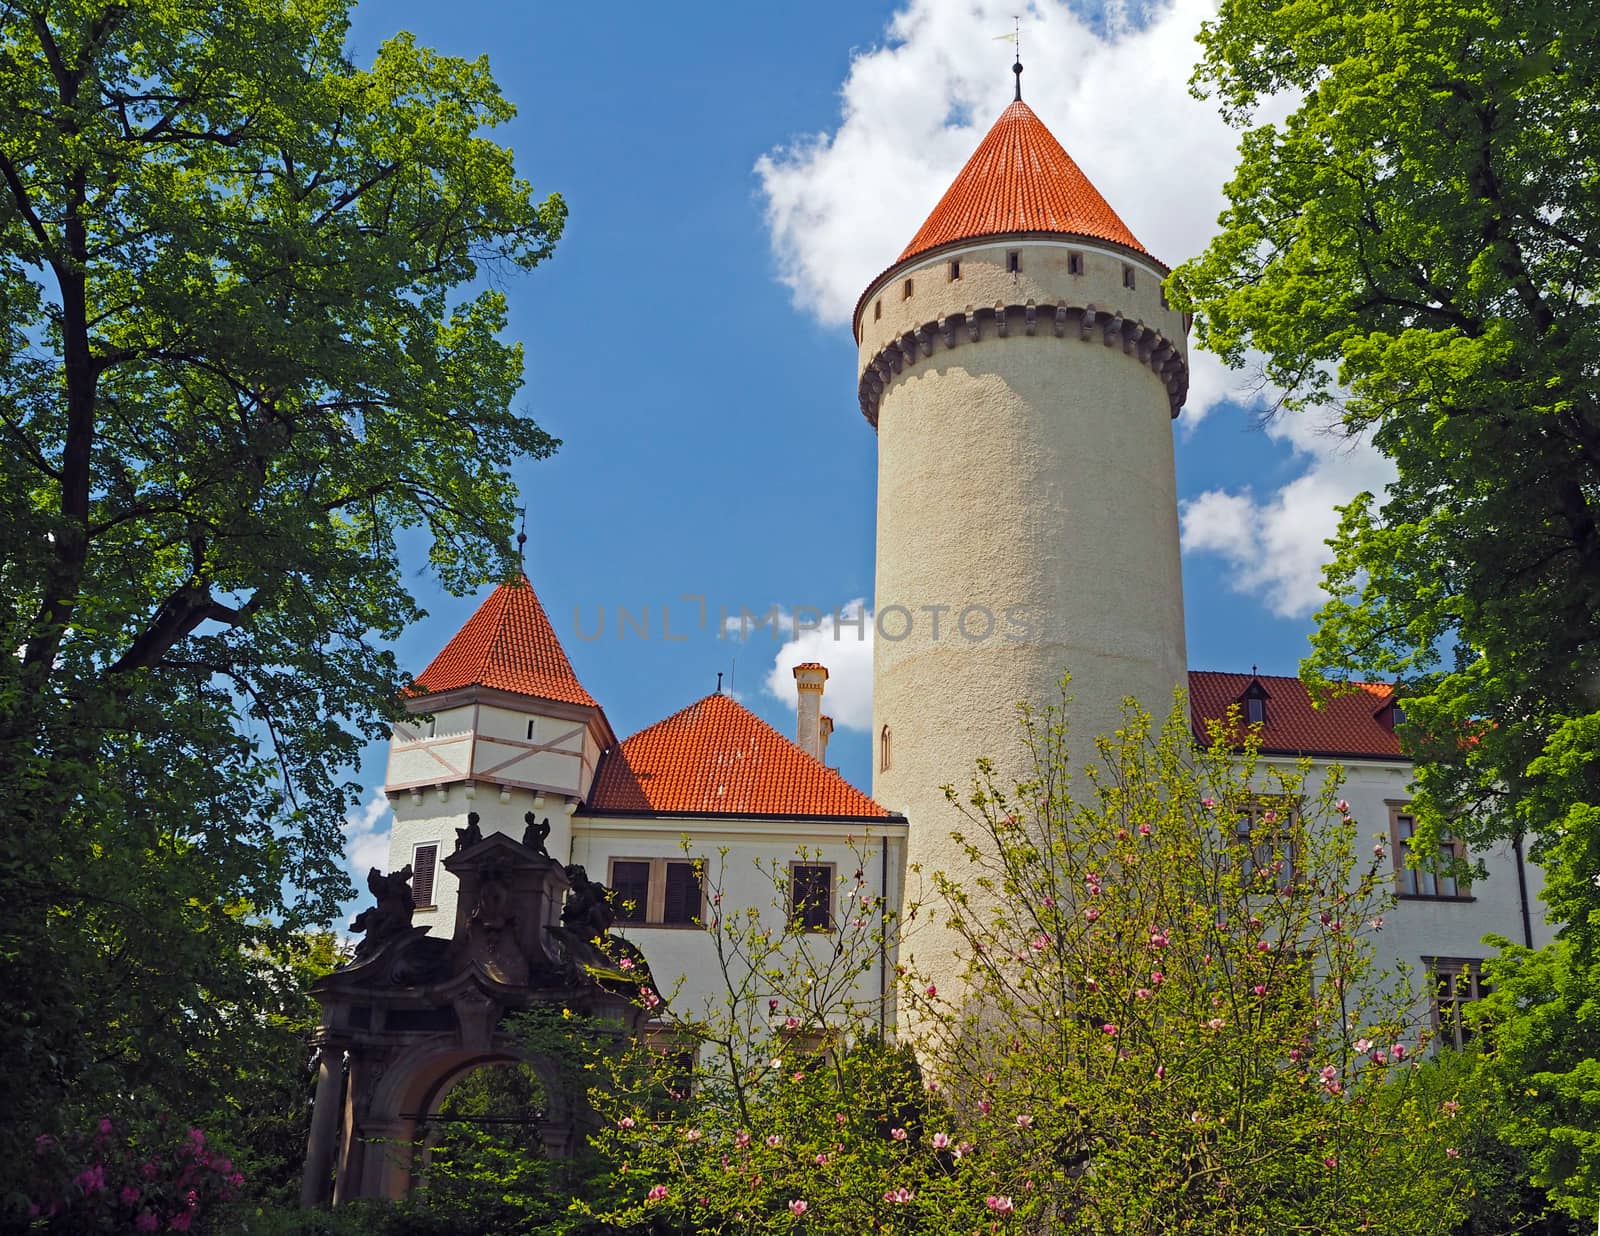 Czech republic, Konopiste, May 16, 2017: Czech state castle chateau Konopiste with round tower and blooming magnolia tree and blue sky